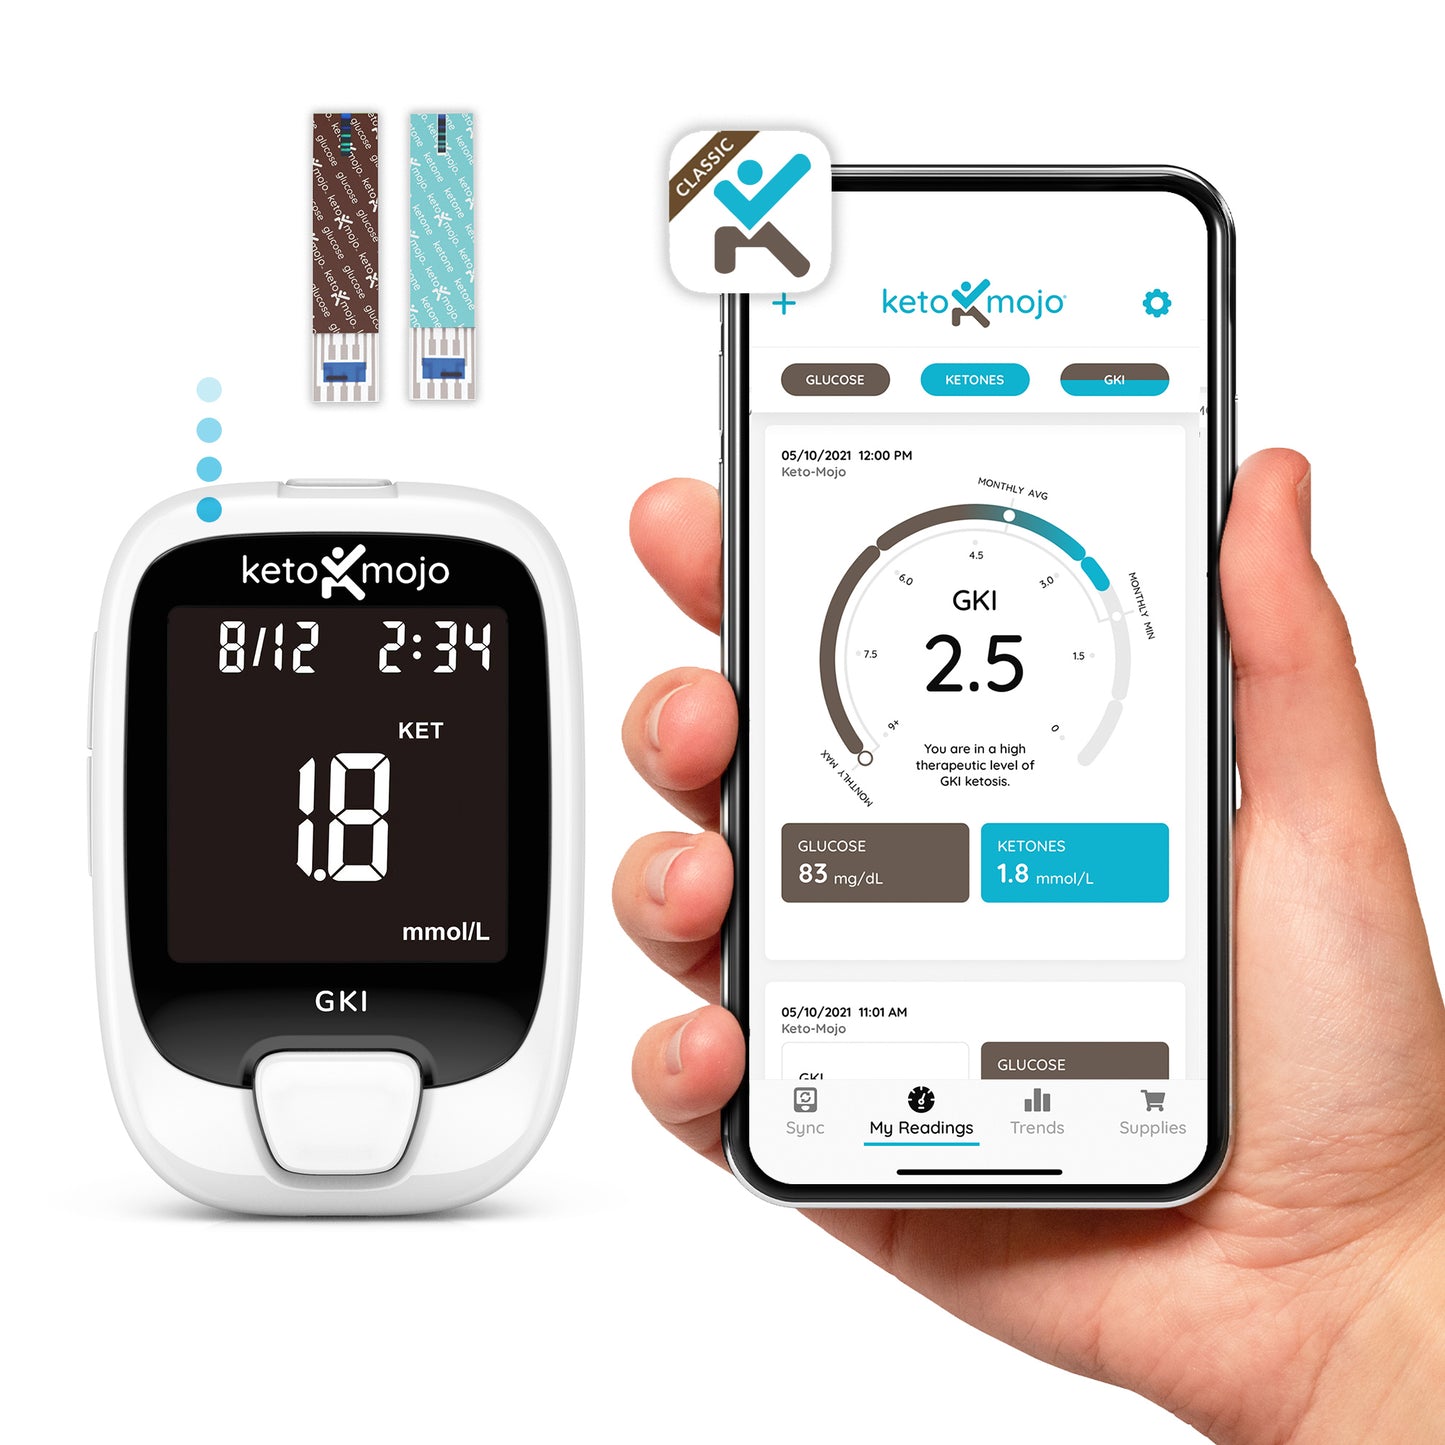 As a Keto-Mojo user, you get free access to the Keto-Mojo Classic App on iOS and Android.  The Bluetooth integration is a seamless connection from your keto meter to the app without any additional formatting or settings needed. This allows you easy access to sync your blood glucose and keto test result from the Keto-Mojo meter to your smartphone.  What a great way to track and monitor your progress!  